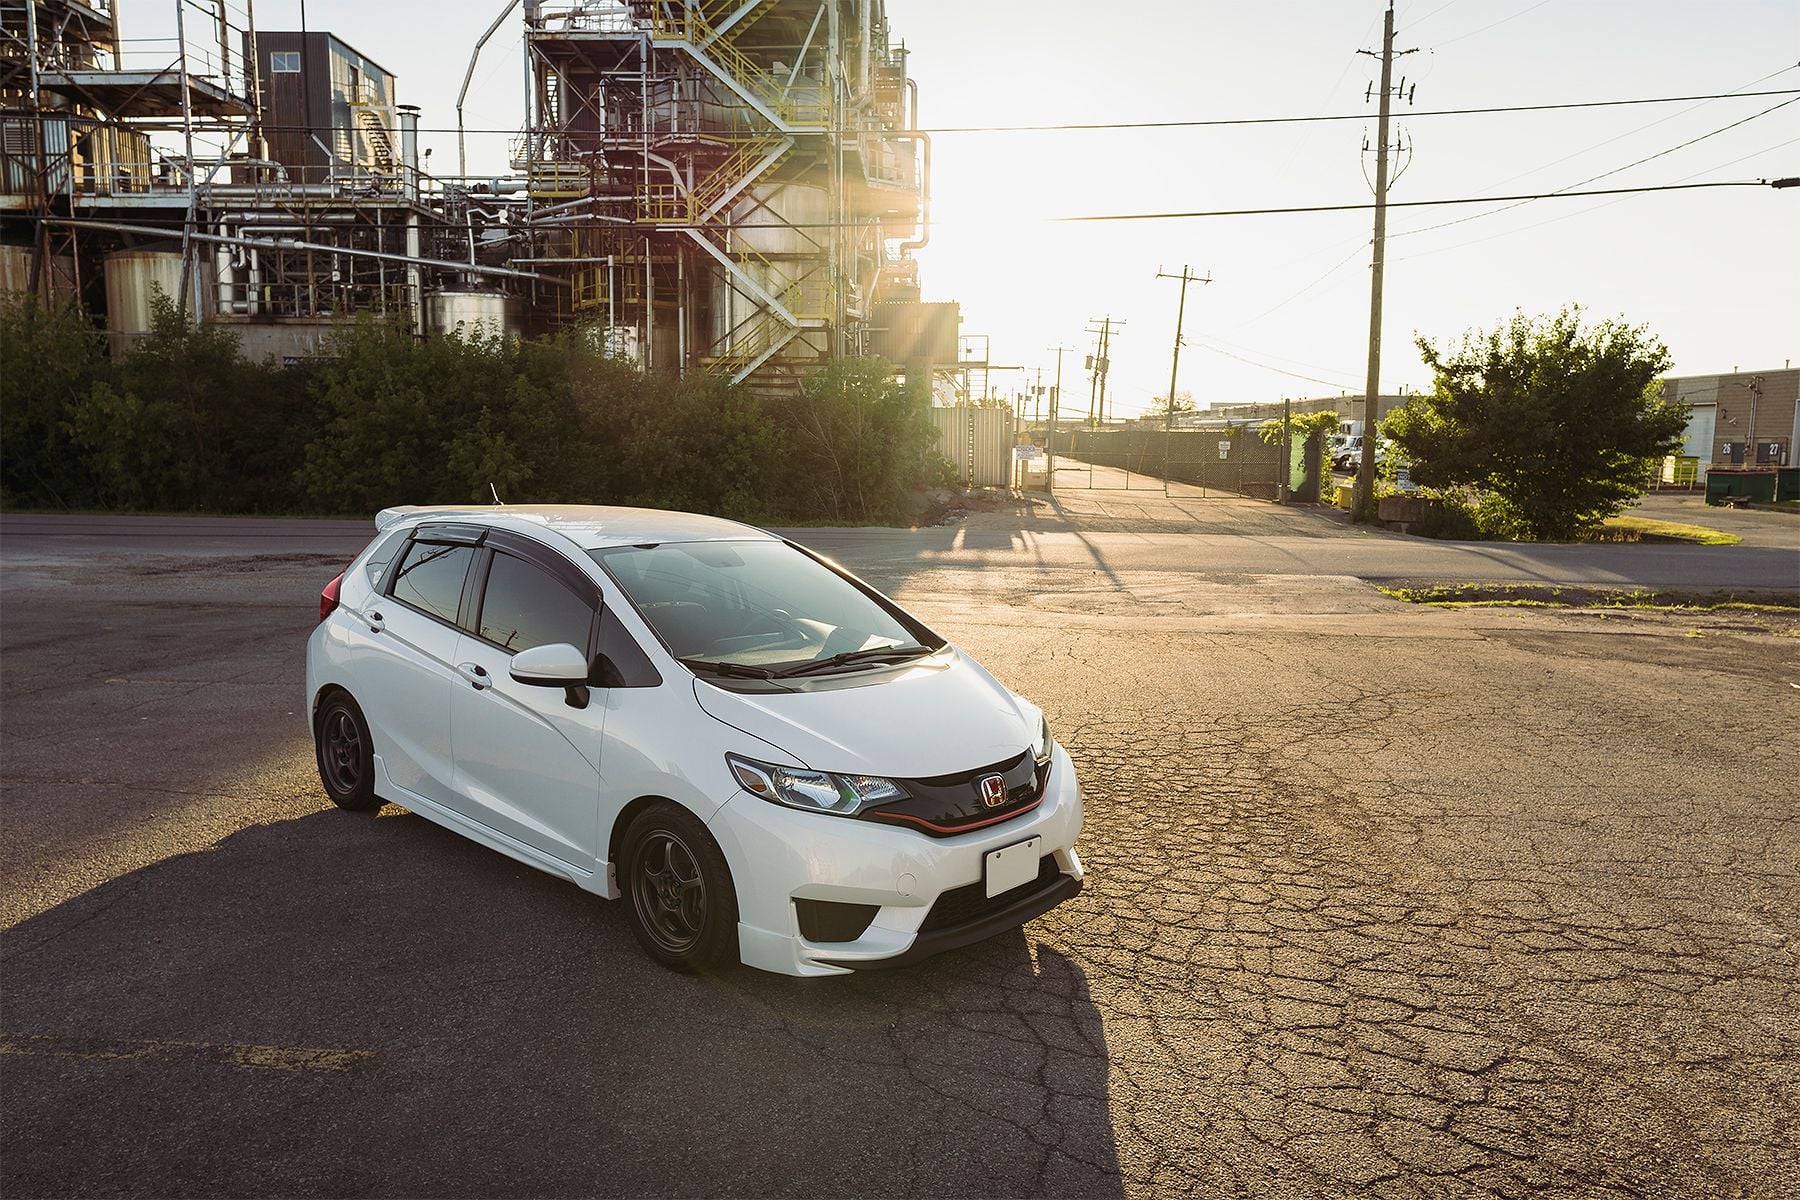 LegenD s GK5 Build Thread Page 7 Unofficial Honda FIT 